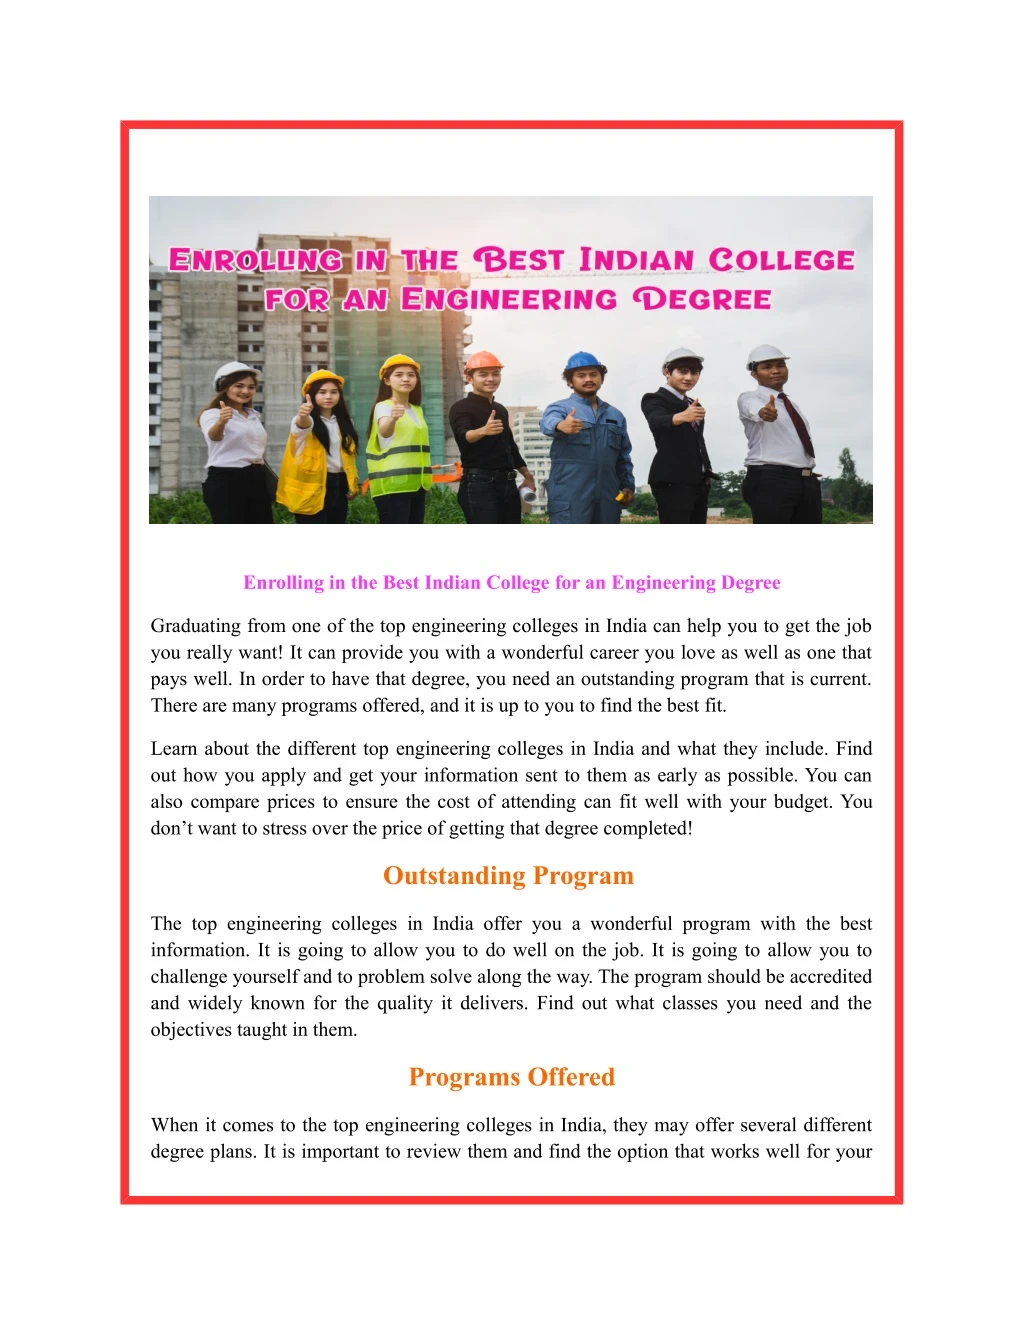 enrolling in the best indian college